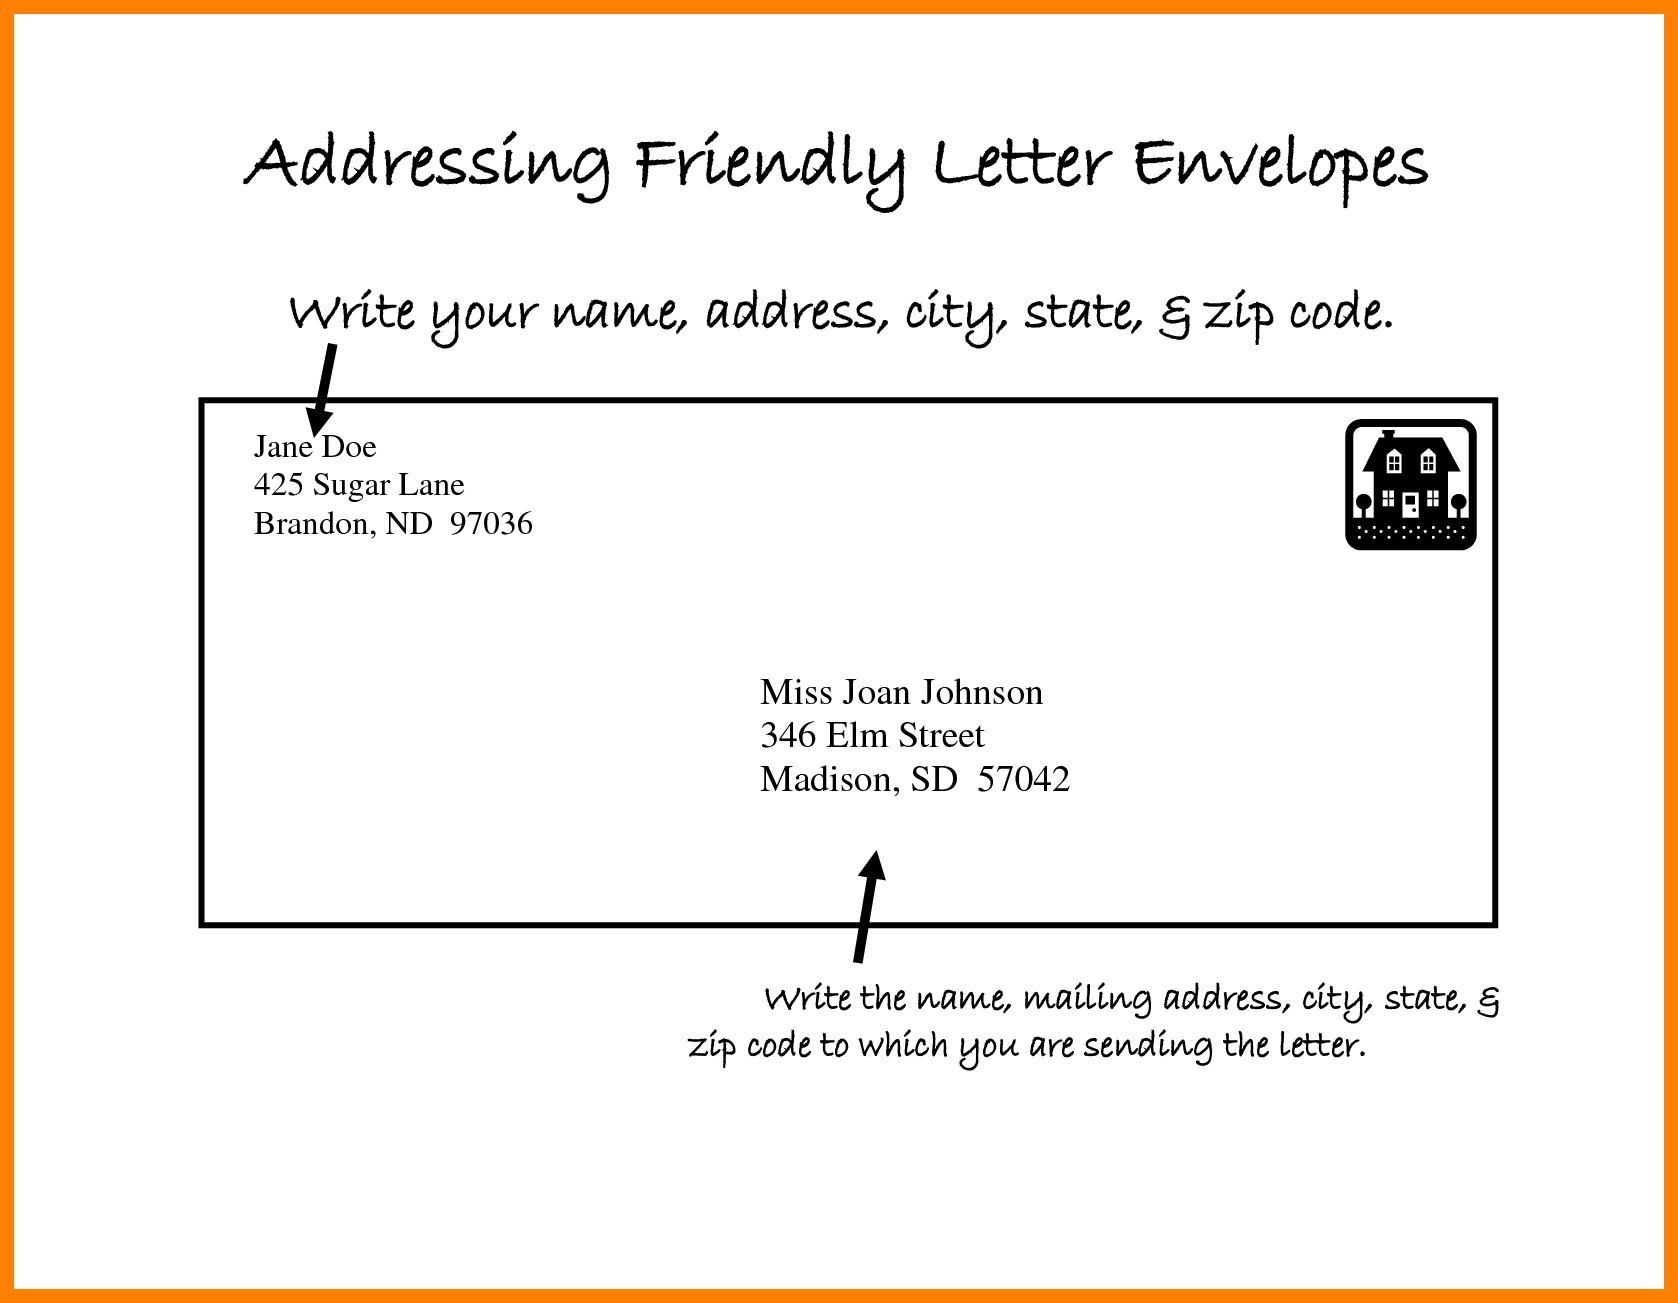 How to Address an Envelope